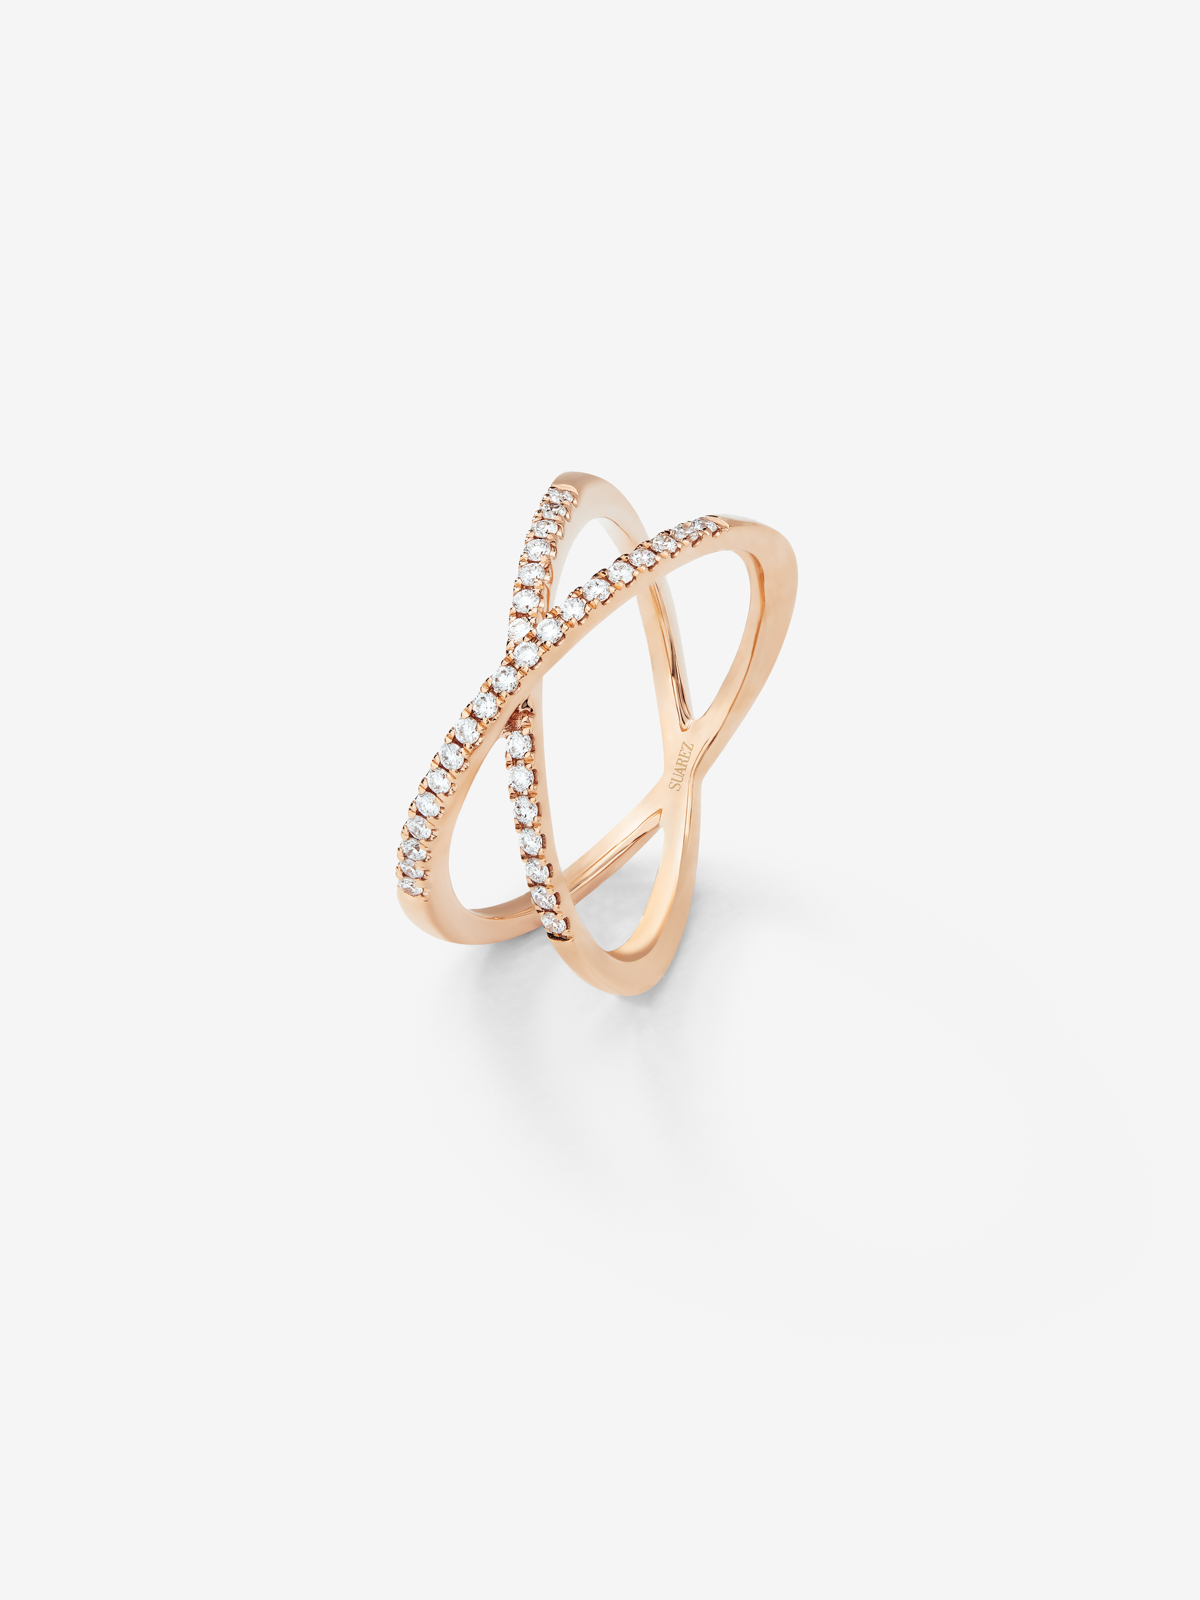 18K Rose Gold Cross Ring with Diamonds